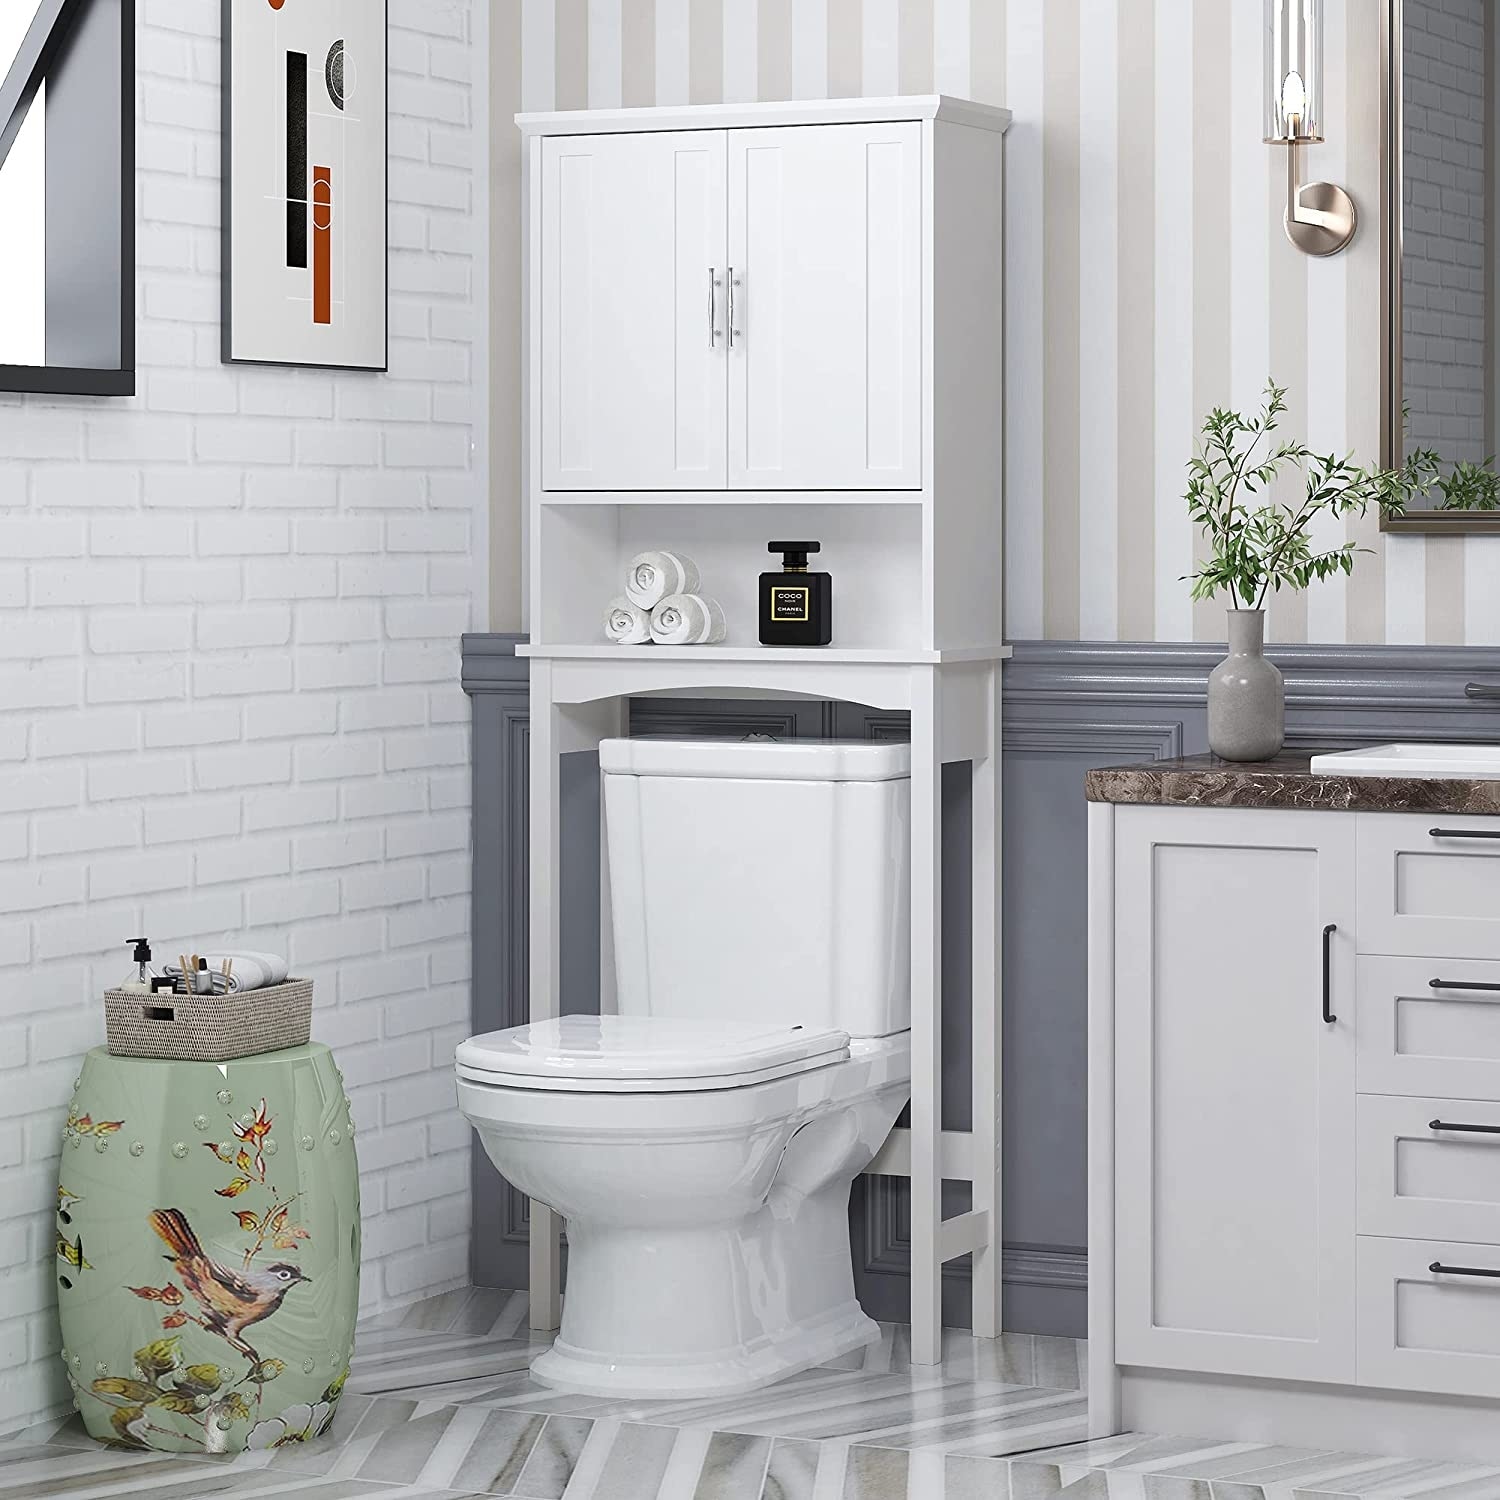 https://ak1.ostkcdn.com/images/products/is/images/direct/66439b59713c11e75ce547d5a66c26e2297948ed/Spirich-Home-Over-The-Toilet-Storage-Cabinet%2C-Bathroom-Shelf-Over-Toilet%2C-Bathroom-Organizer-Space-Saver%2C-White.jpg